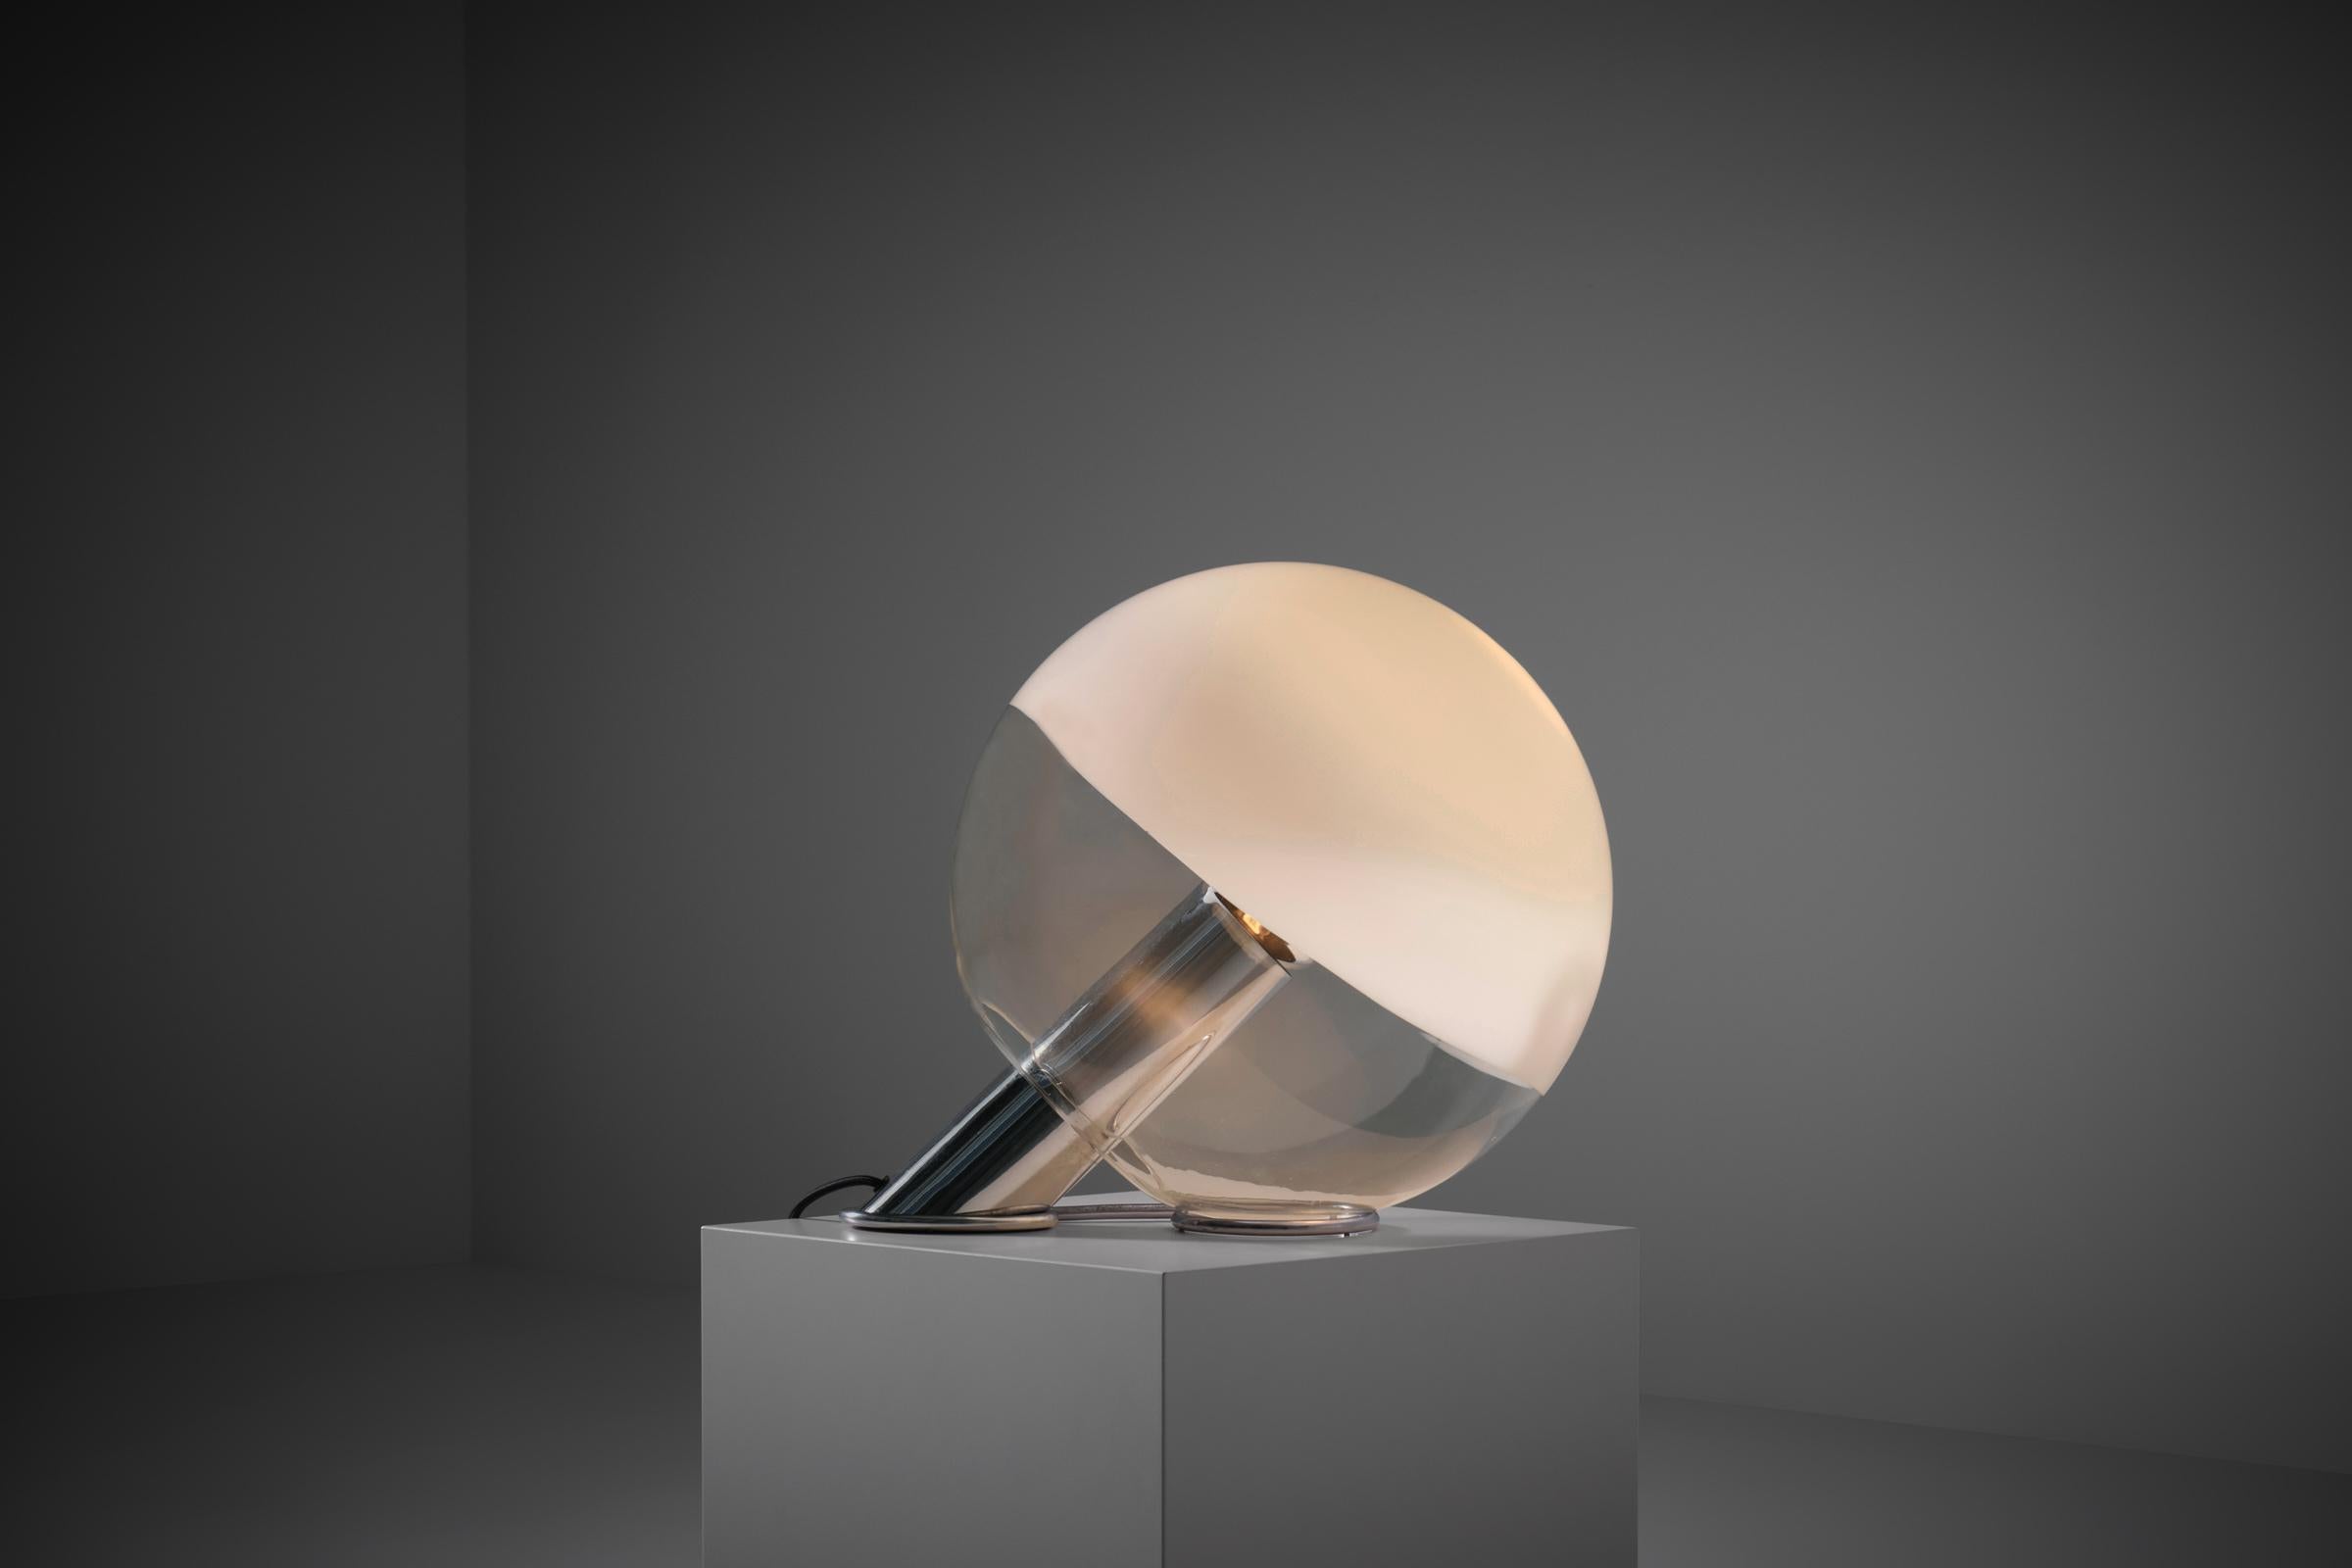 Rare glass table lamp by Pia Guidetti Crippa for Lumi, Italy 1970s. Interesting sculptural design composed of a glass globe resting on a chromed base with a central diagonal tube. The clean clear globe shape is subtly decorated with an organic